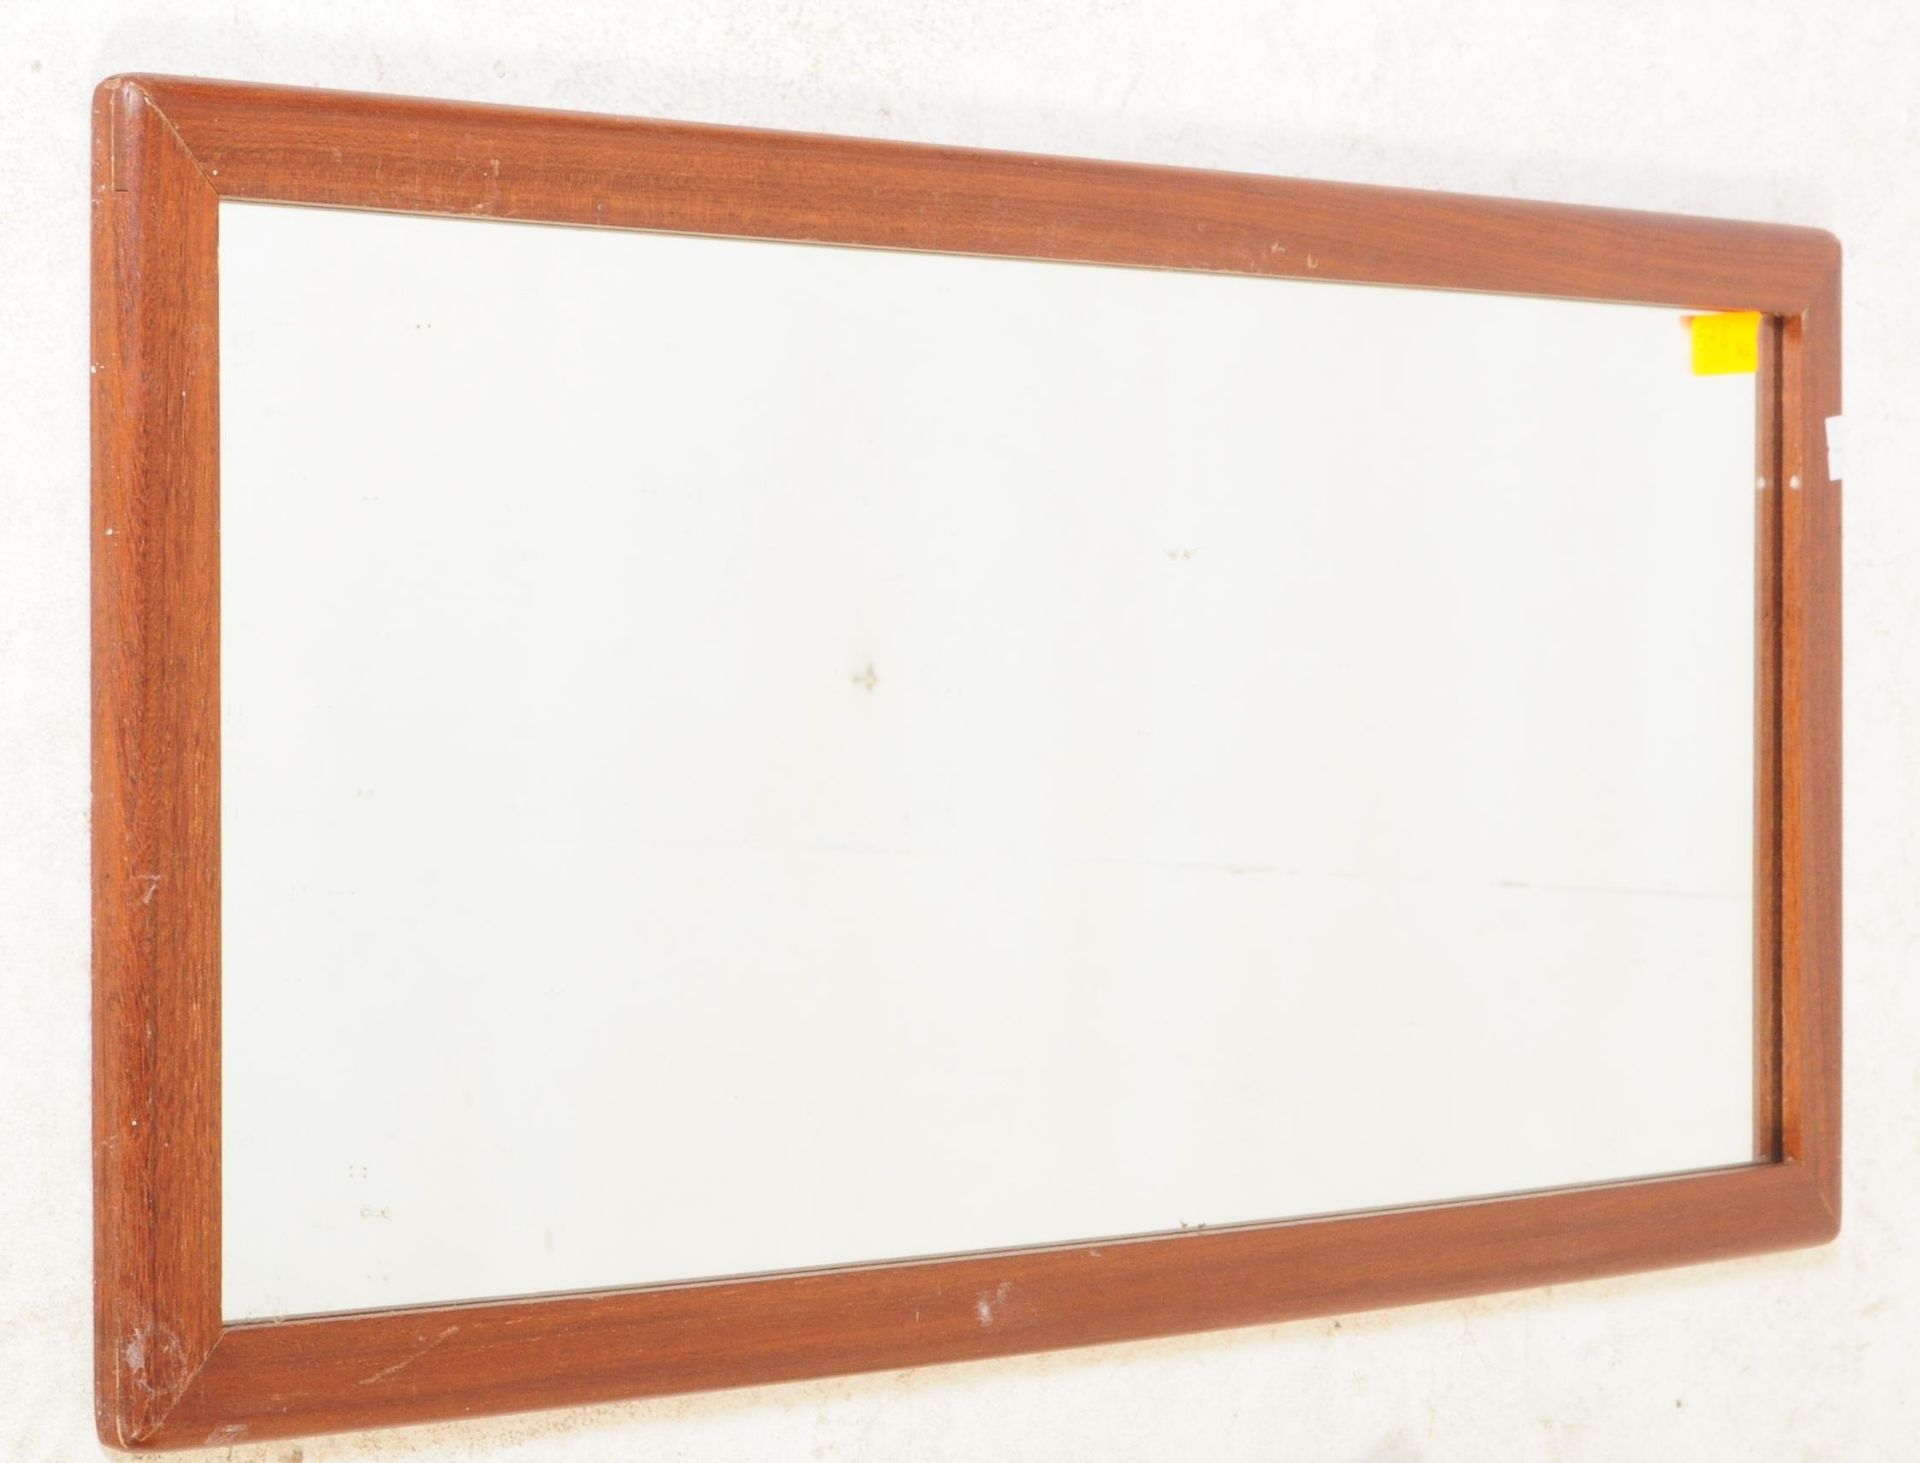 TWO 20TH CENTURY WALL MIRRORS - 1930'S & TEAK FRAME - Image 3 of 5